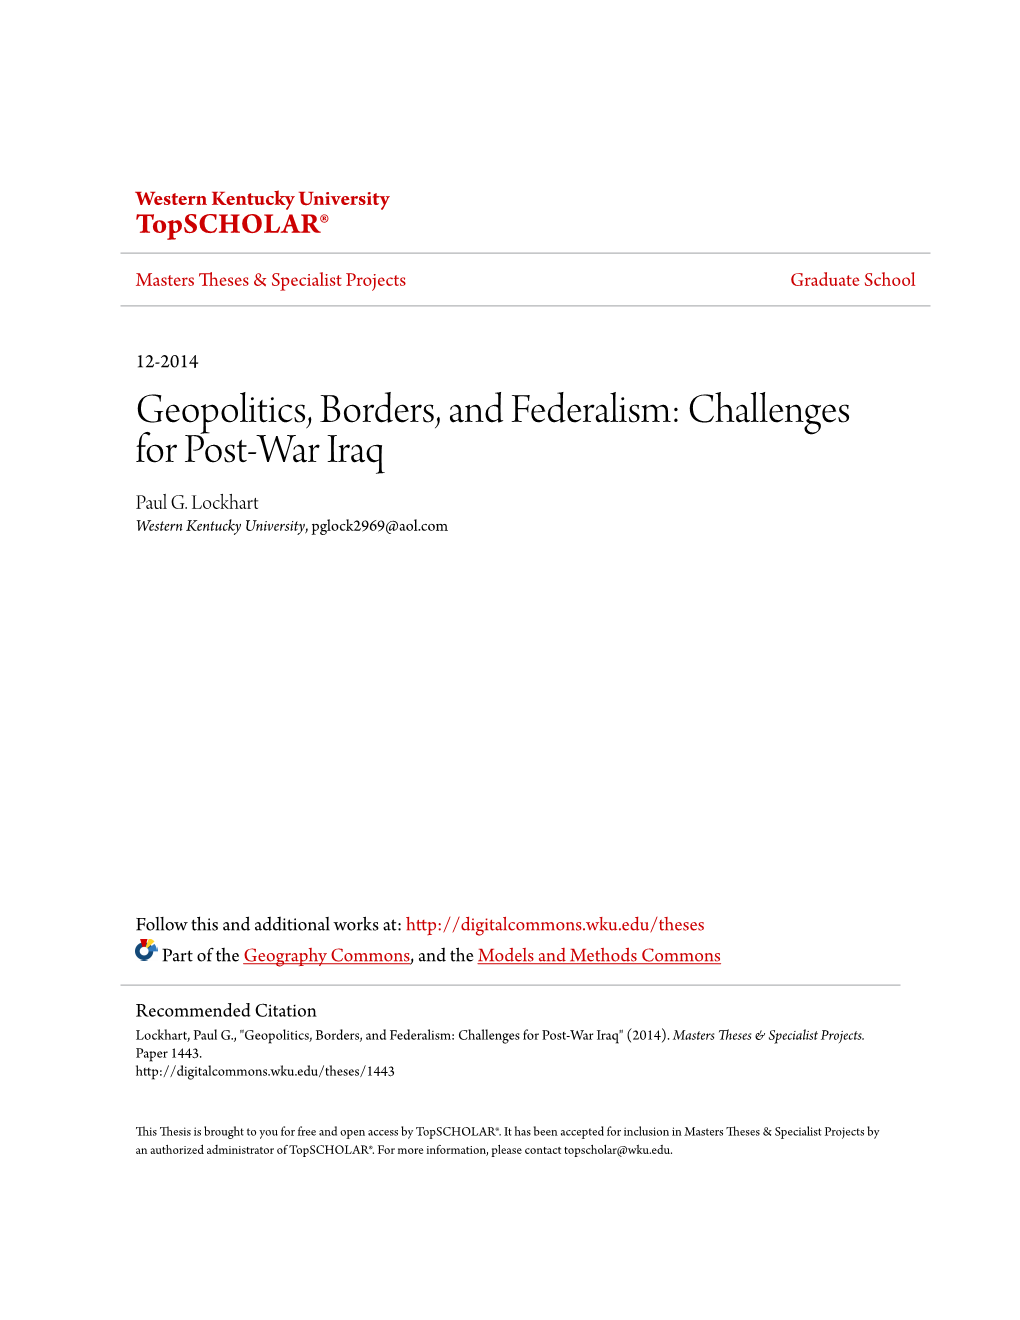 Geopolitics, Borders, and Federalism: Challenges for Post-War Iraq Paul G